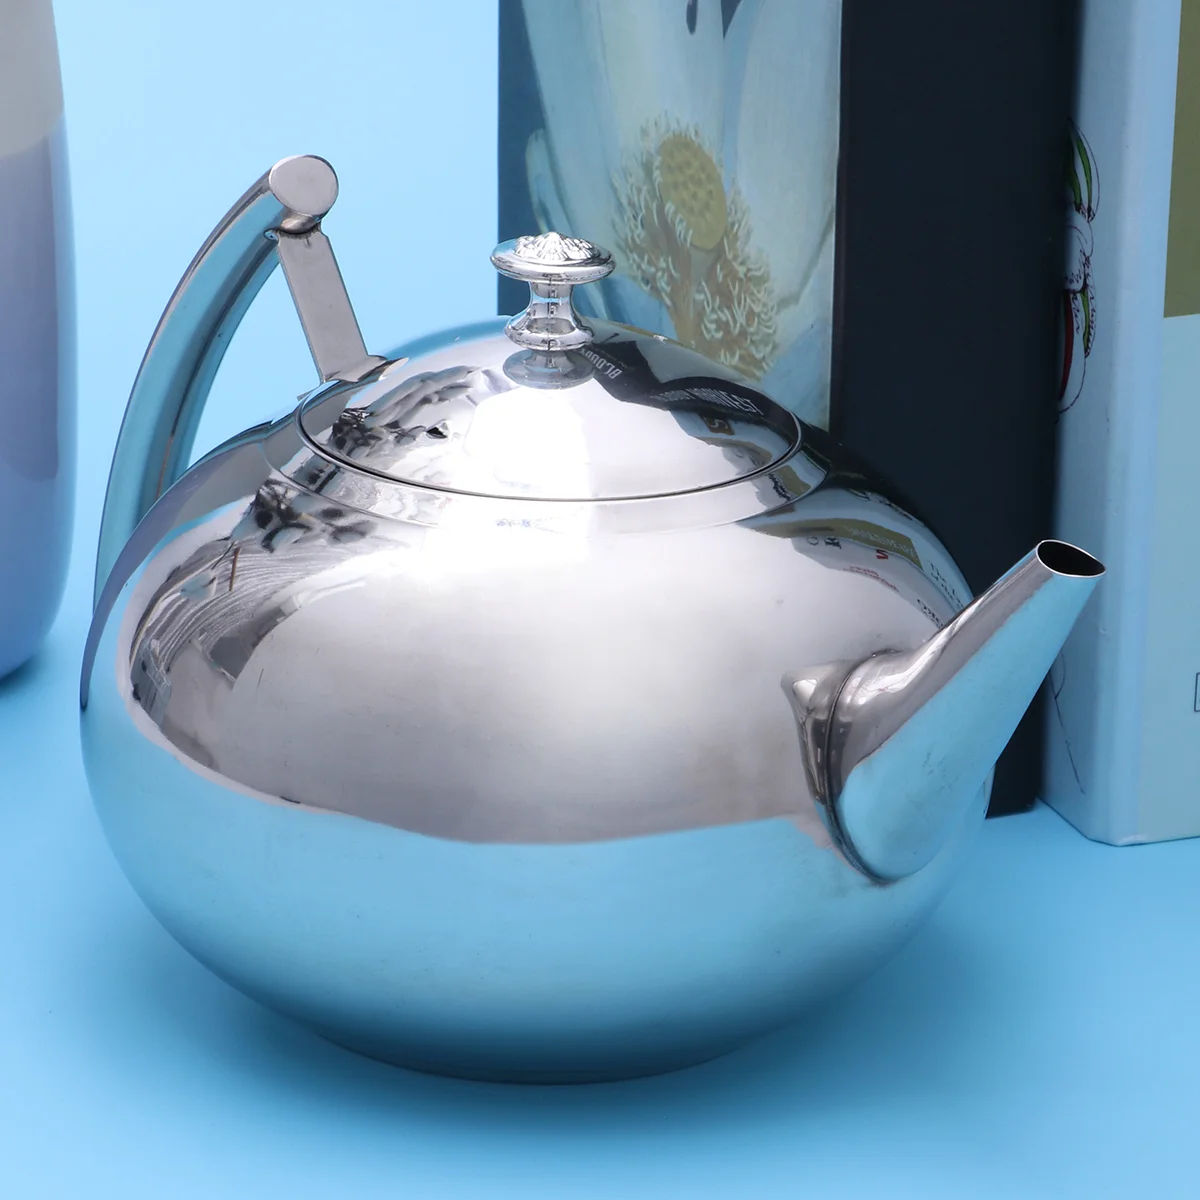 

Tea Kettle Steel Stainless Pot Teapot Topstoveinfuser Teapots Infusion Coffee Whistling Stovetop Gas Water Loose Pots Kettles